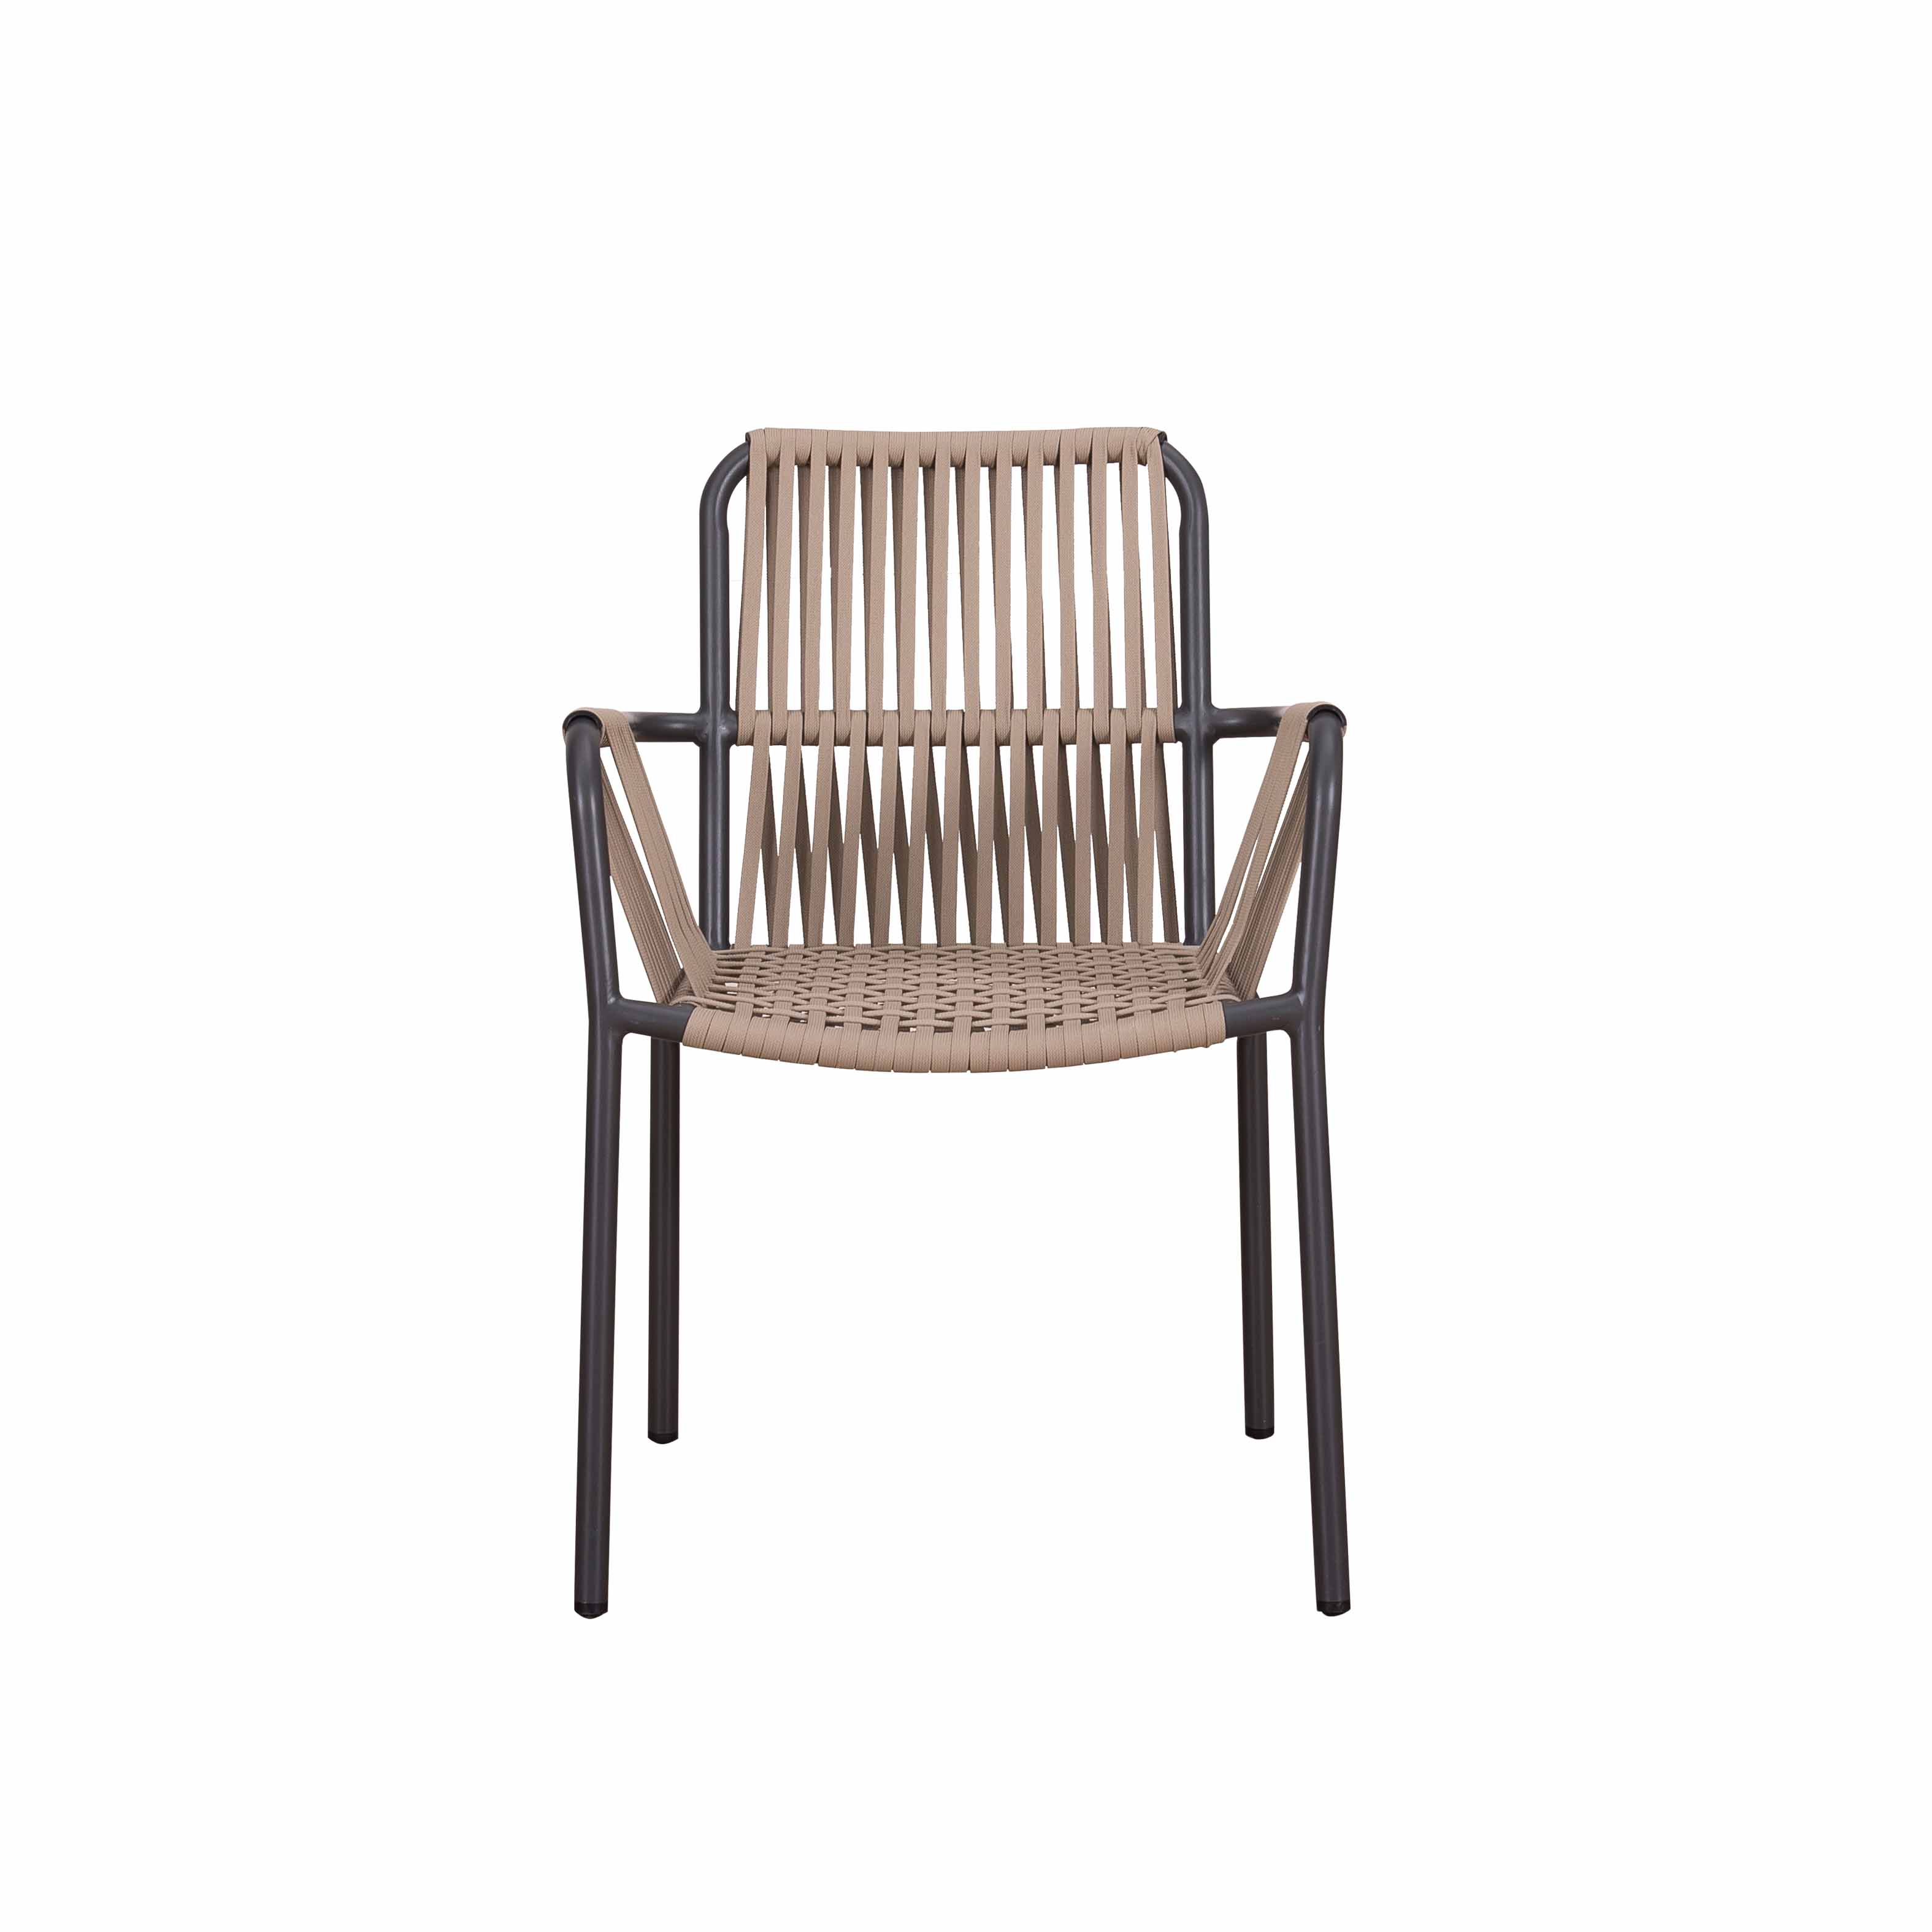 Lincoln rope chair S8